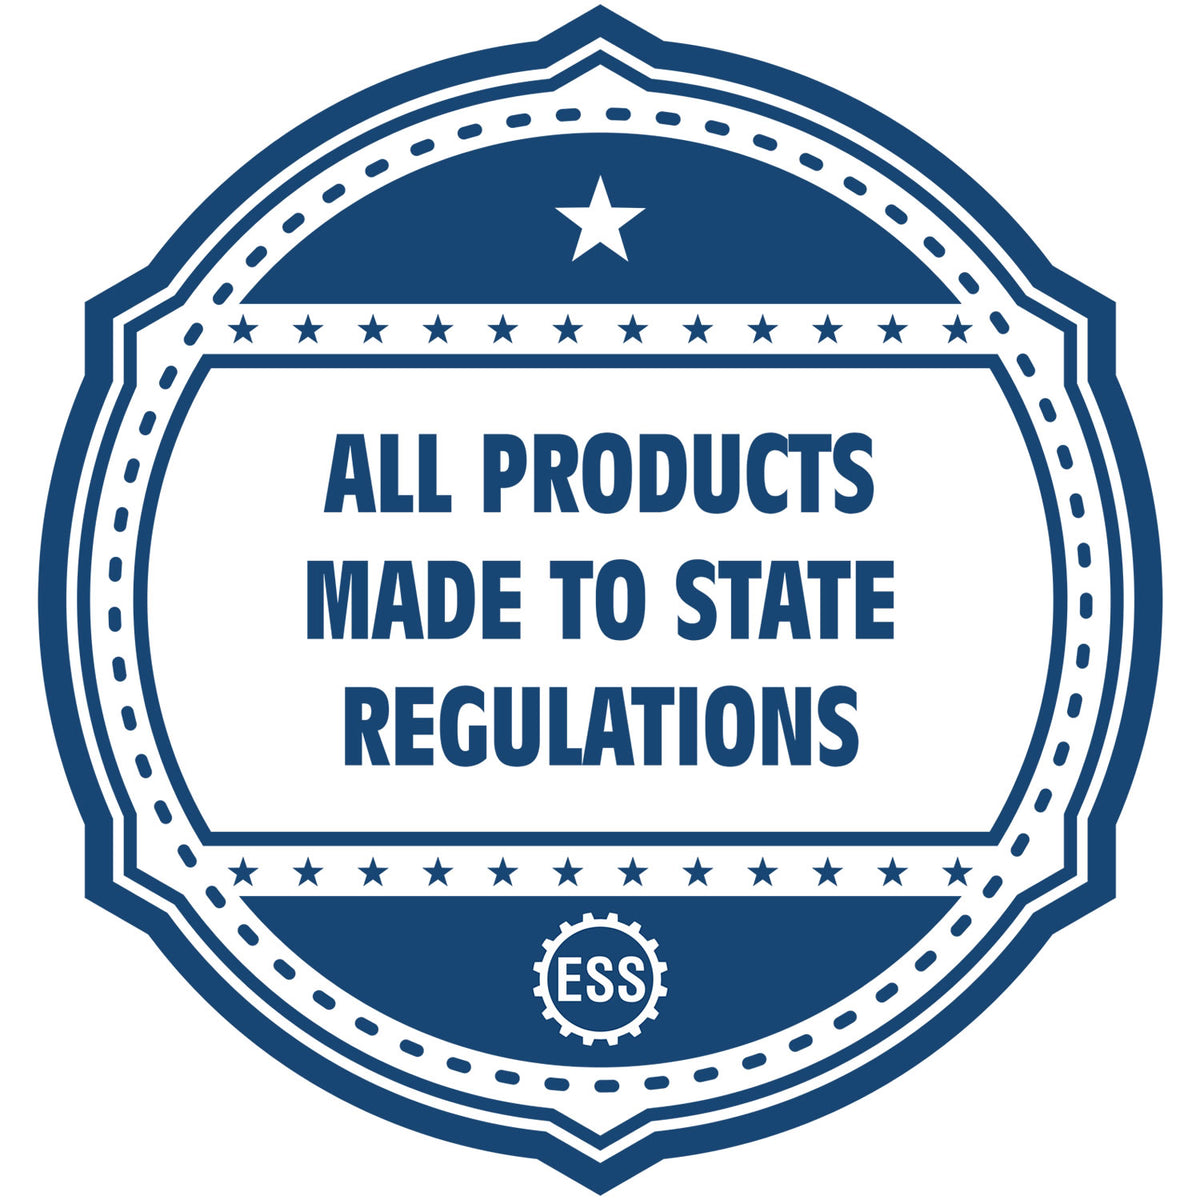 An icon or badge element for the Slim Pre-Inked Michigan Landscape Architect Seal Stamp showing that this product is made in compliance with state regulations.